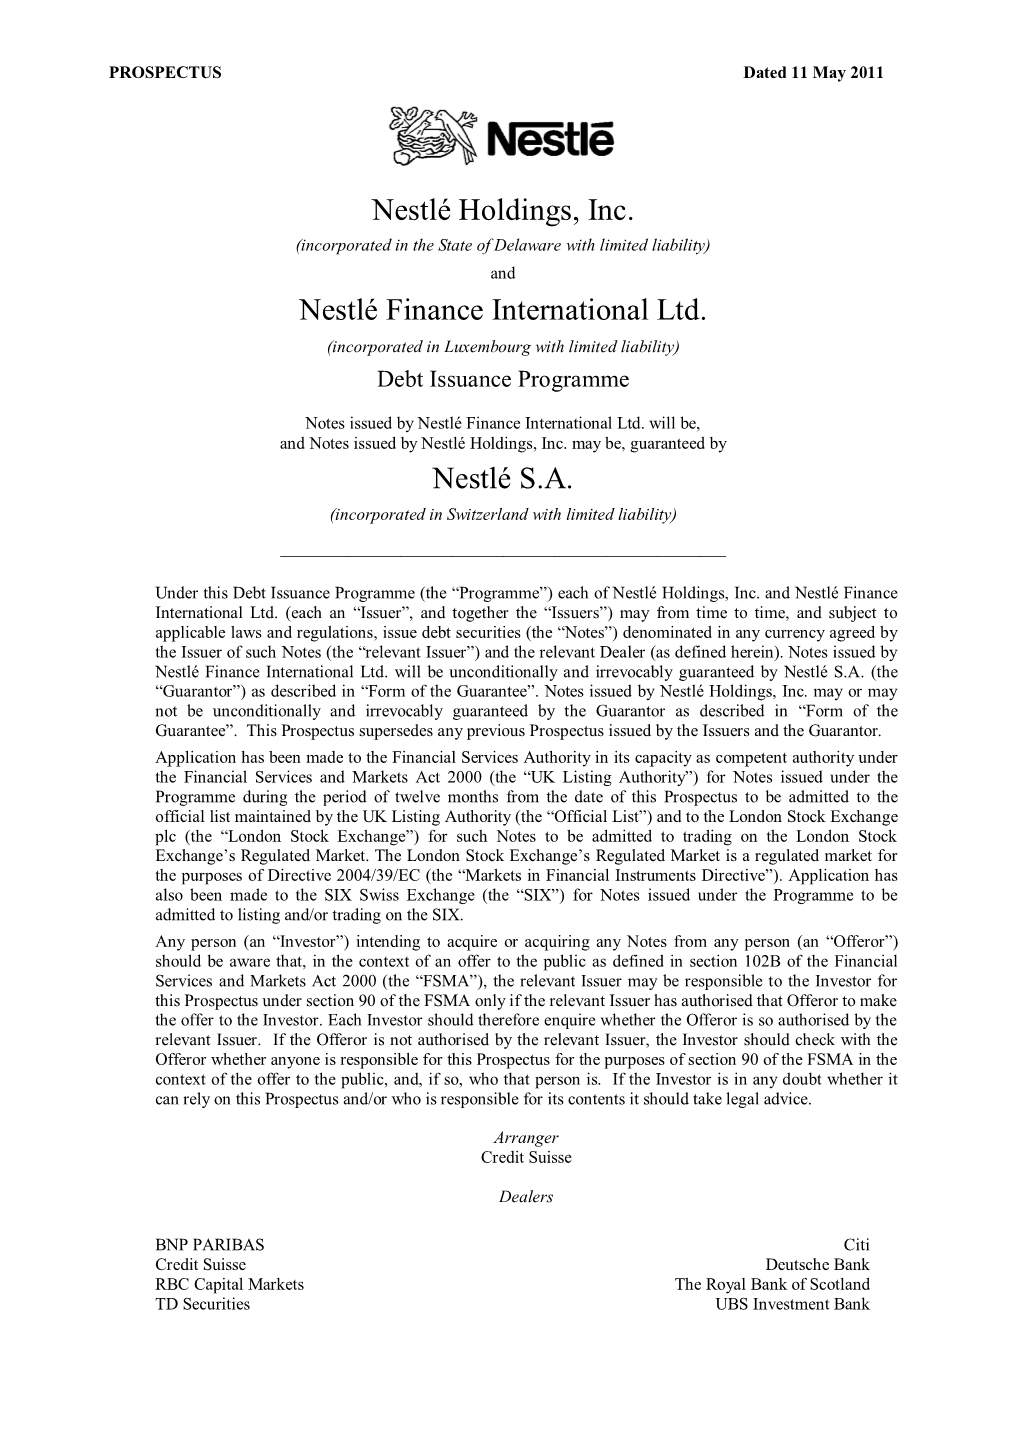 Nestlé Holdings, Inc. (Incorporated in the State of Delaware with Limited Liability) and Nestlé Finance International Ltd